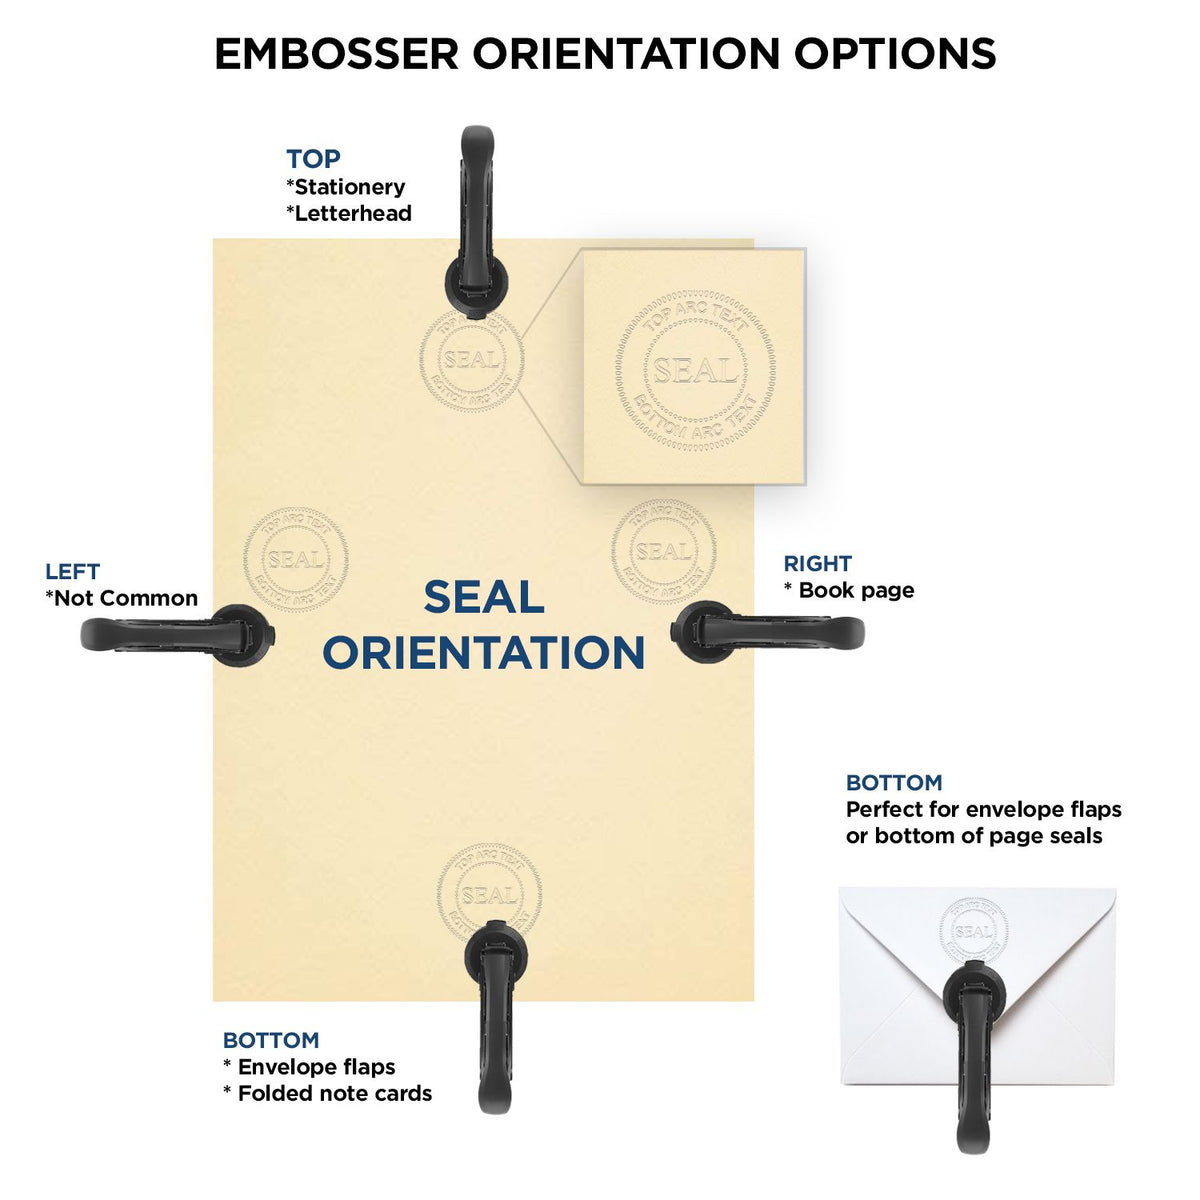 An infographic for the Handheld Arizona Professional Geologist Embosser showing embosser orientation, this is showing examples of a top, bottom, right and left insert.